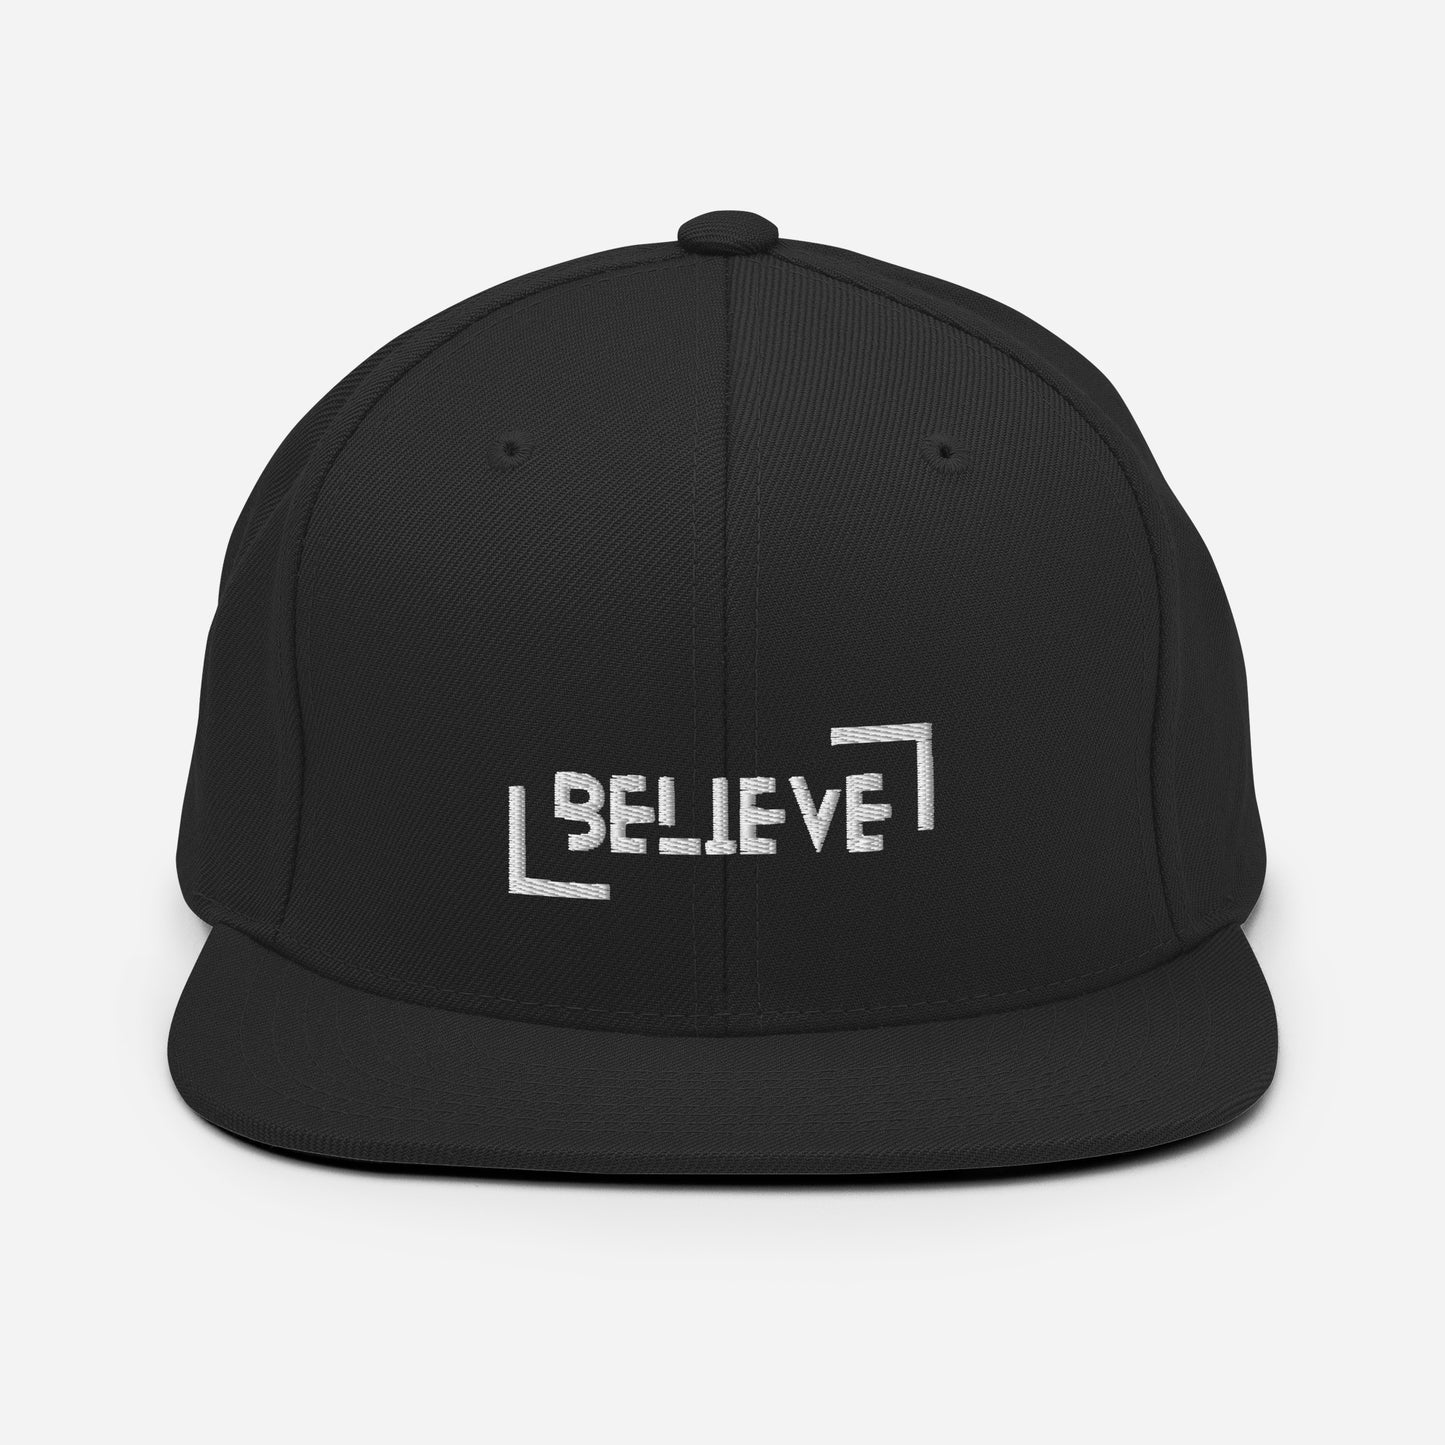 Embroidered Believe Snapback Hat